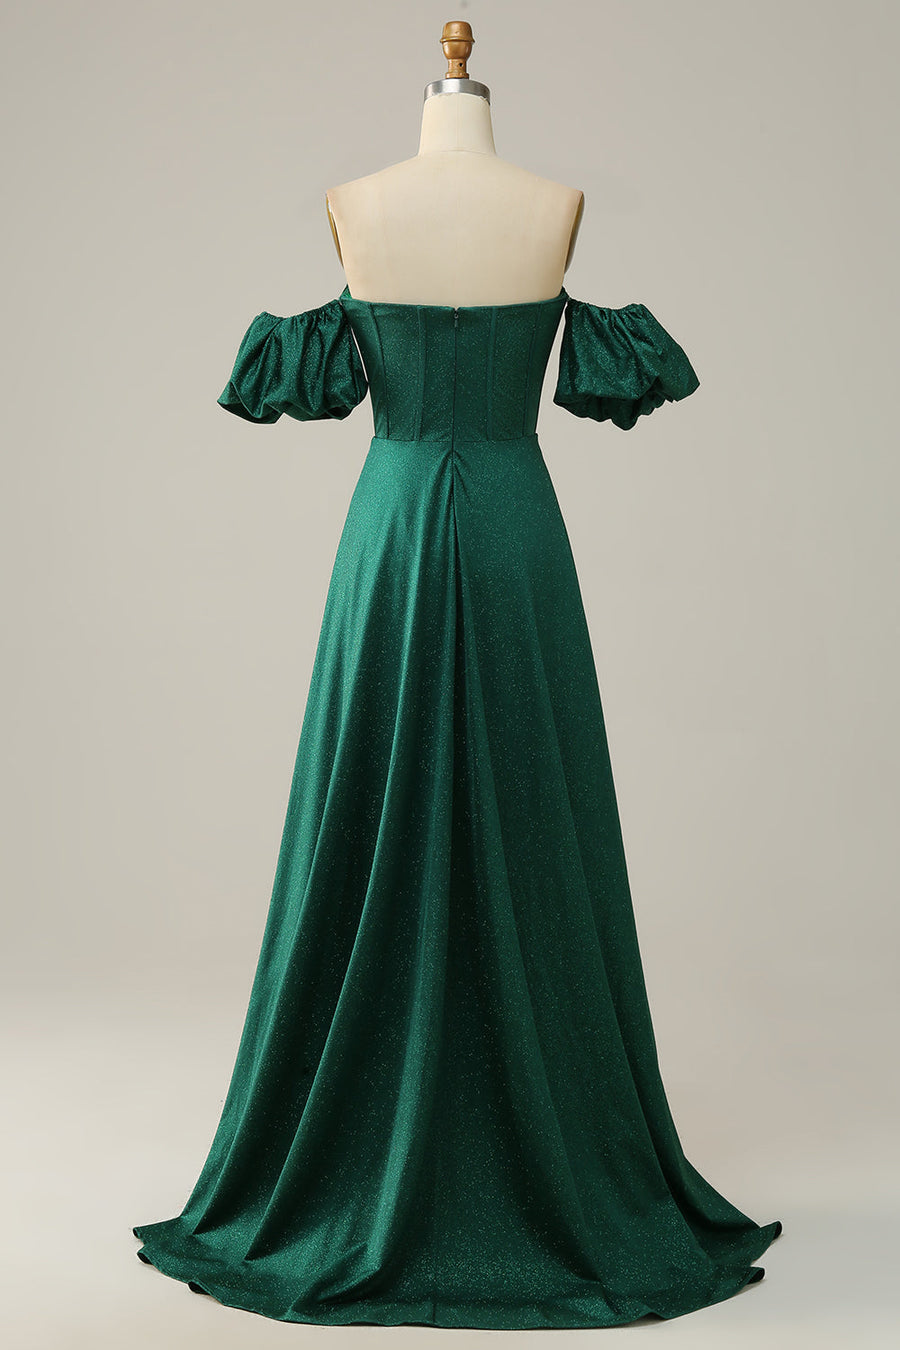 Sparkly Hunter Green Off-the-Shoulder Puff Sleeves A-line Long Prom Dress